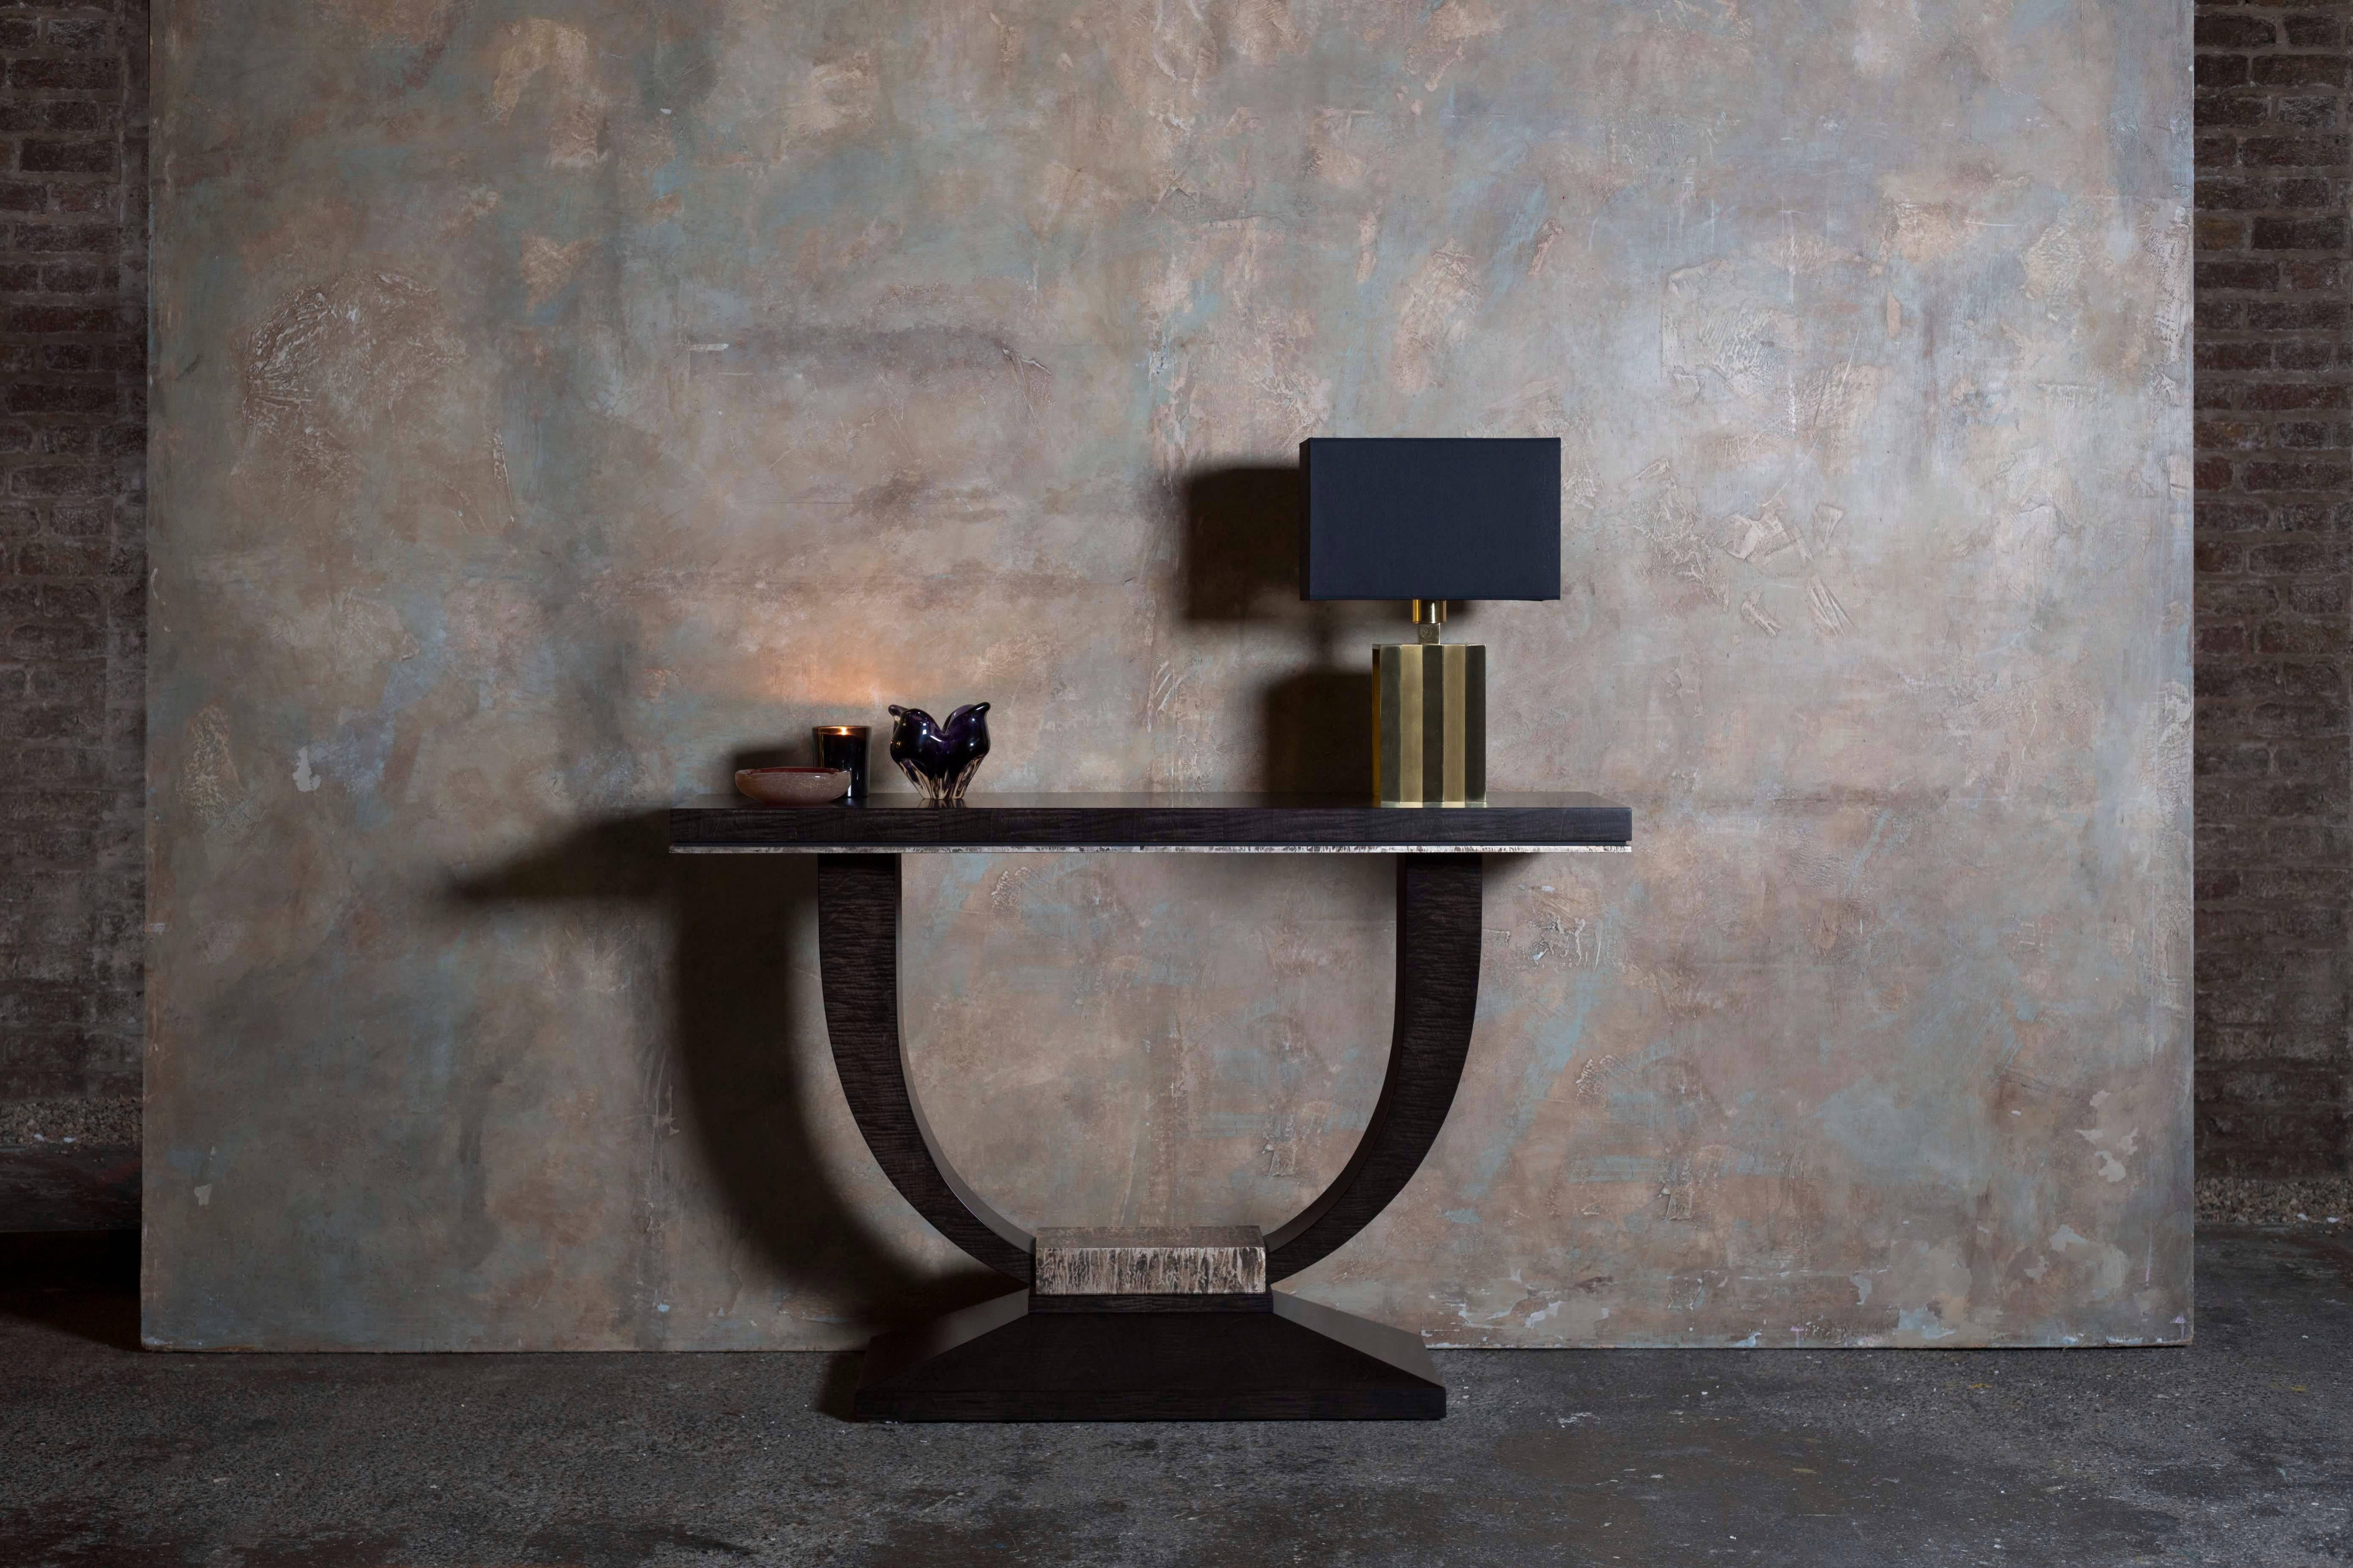 Celebrating the re-launch of a long standing favourite, the beautiful Albany console, now with a contemporary twist. Showcasing in the London showroom finished in hand tinted satin sycamore, featuring a new highly distressed silvered finish.

The